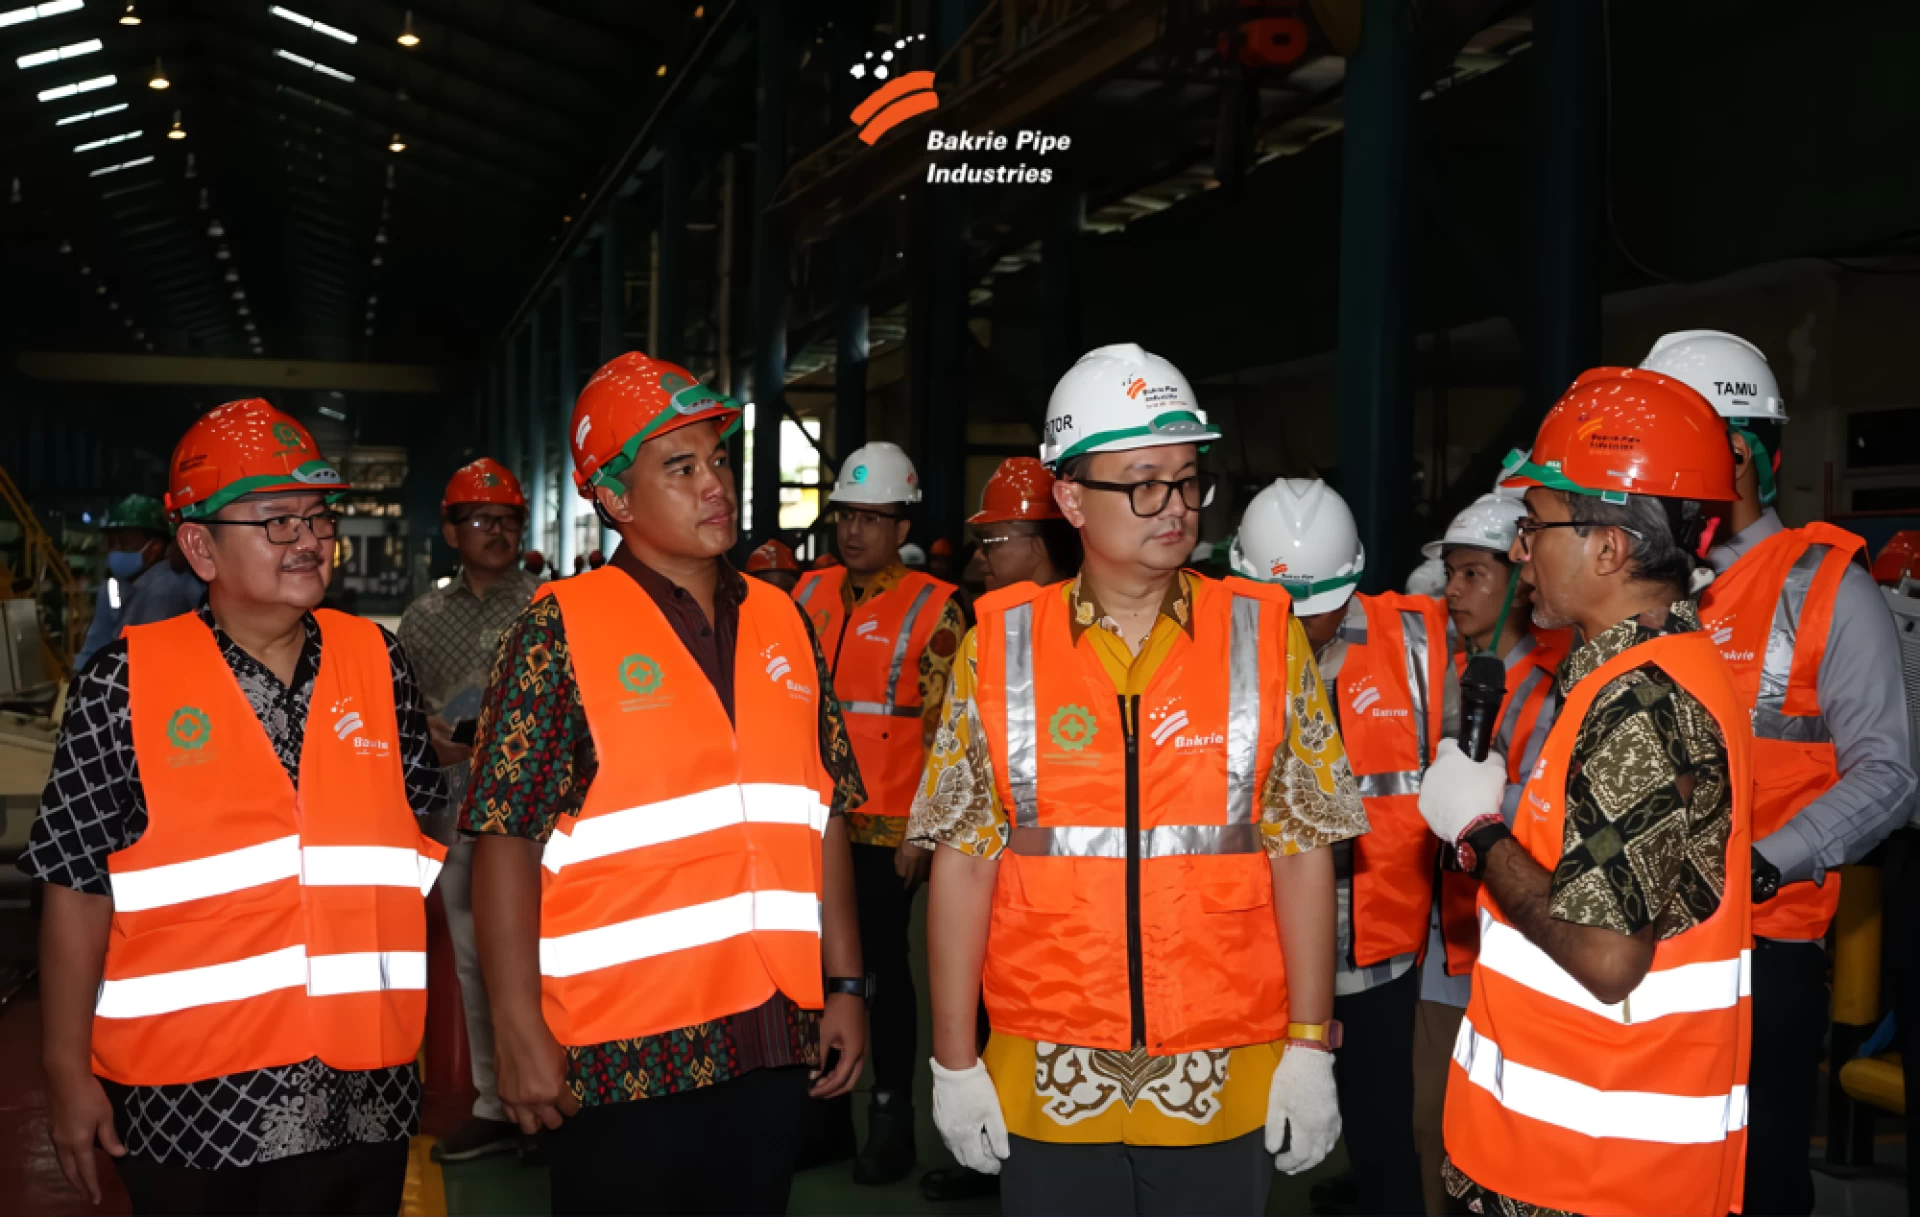 The Visit of the Deputy Minister of Trade, Mr. Dr. Jerry Sambuaga to PT Bakrie Pipe Industries